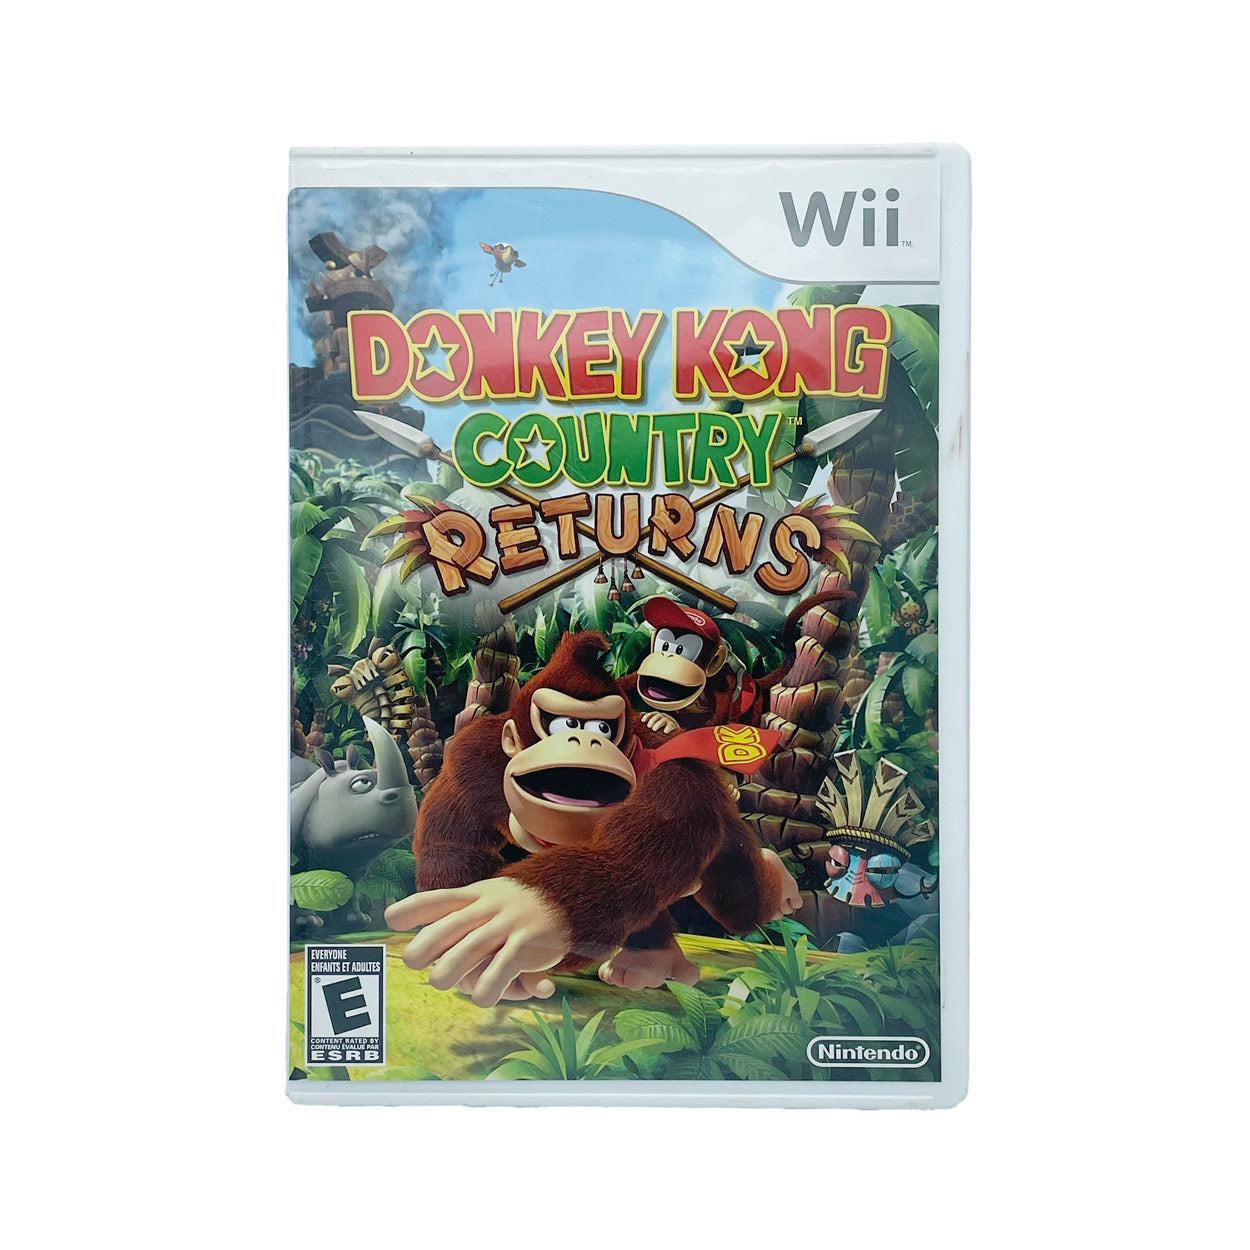 DONKEY KONG COUNTRY RETURNS